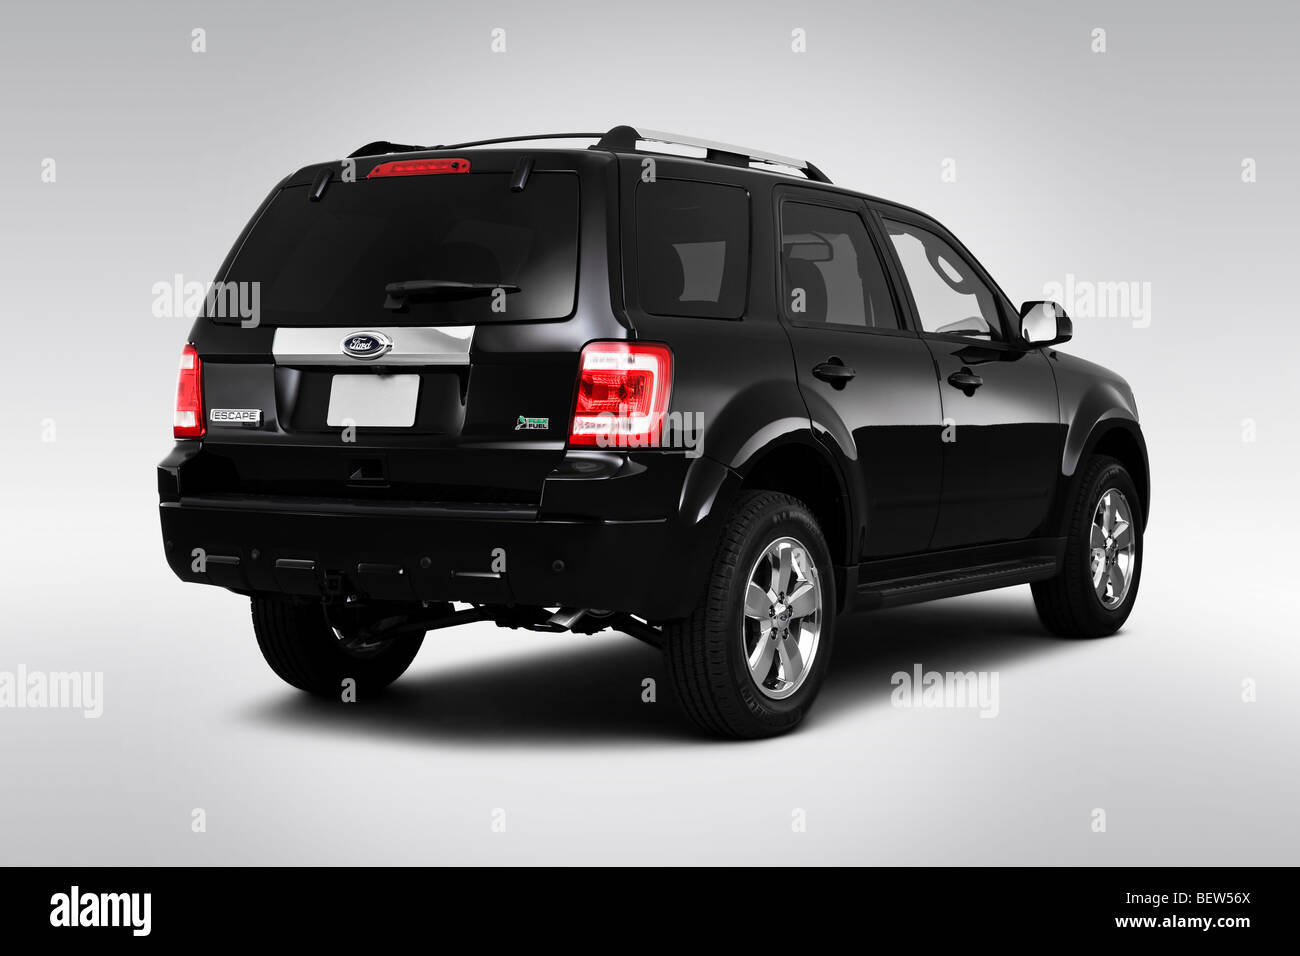 2010 Ford Escape Limited in Black - Rear angle view Stock Photo - Alamy